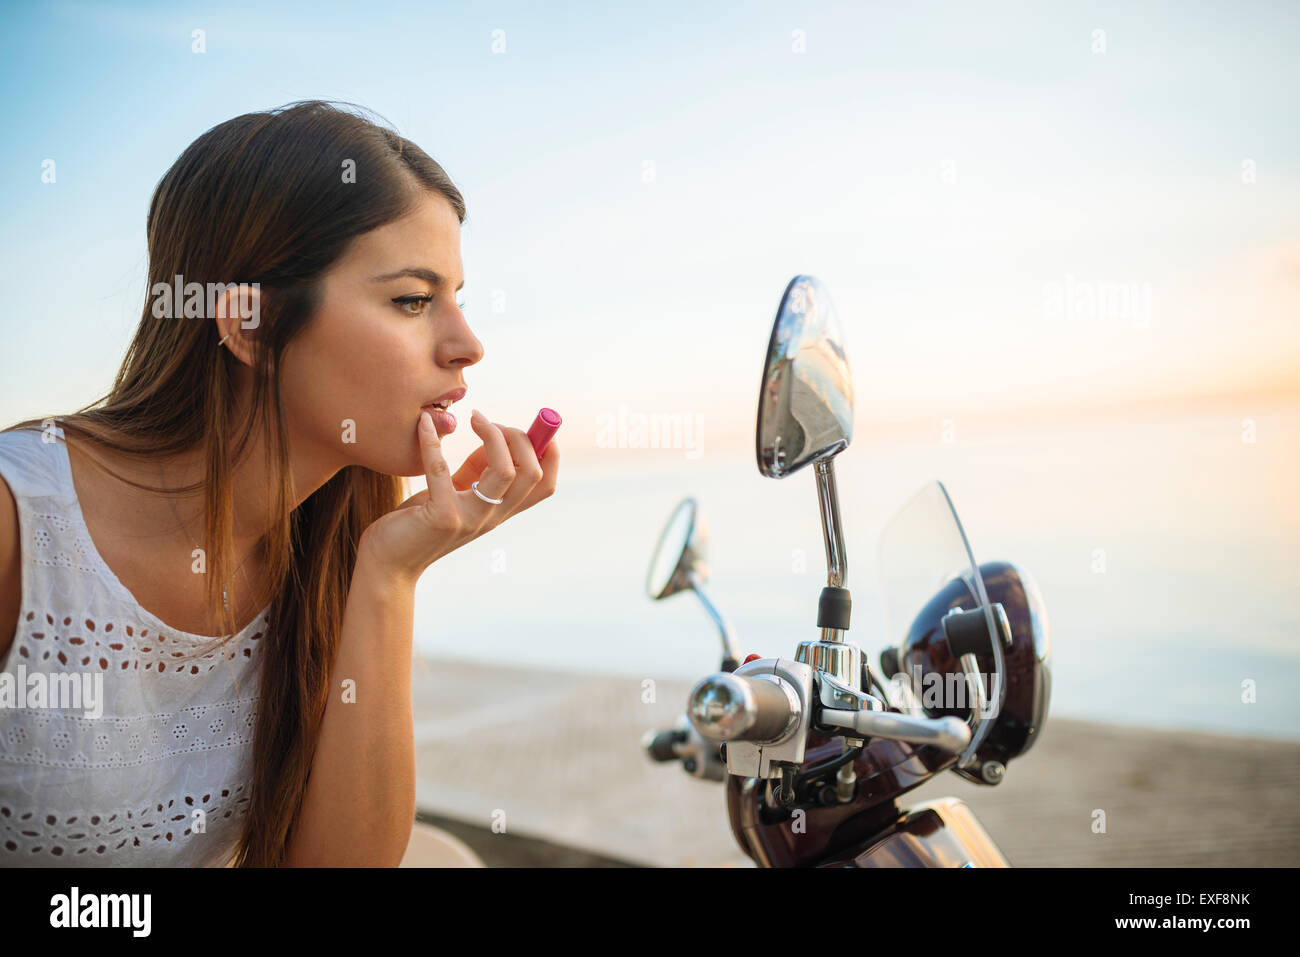 Young woman applying lipstick in motorcycle mirror, Manila, Philippines Stock Photo